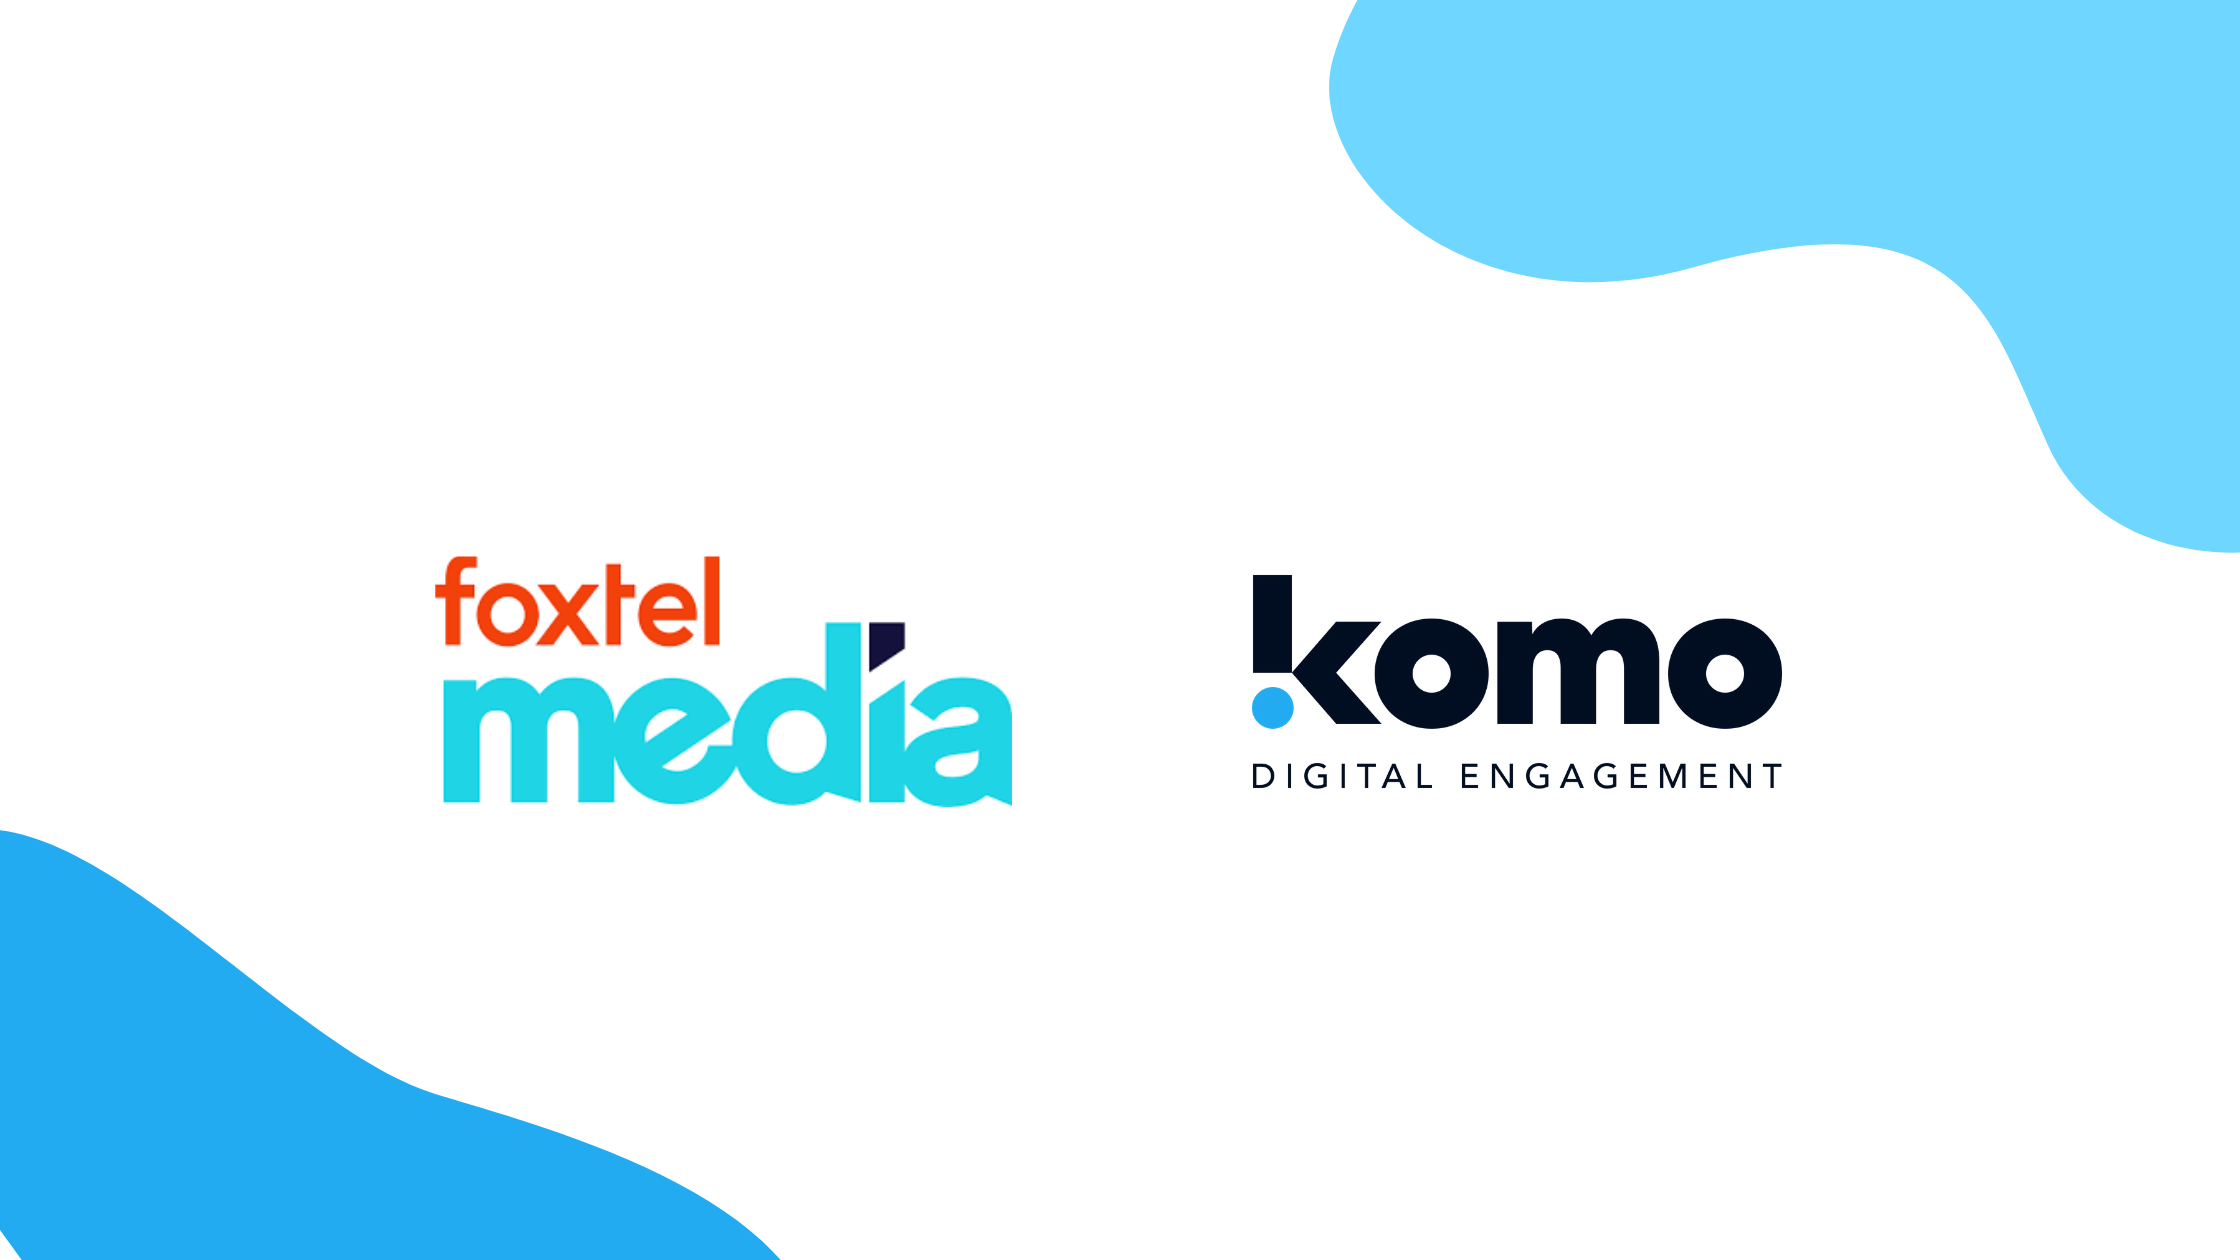 Komo Digital is proud to announce that Foxtel Media extended their existing relationship with us to bring more value to viewers and advertisers.